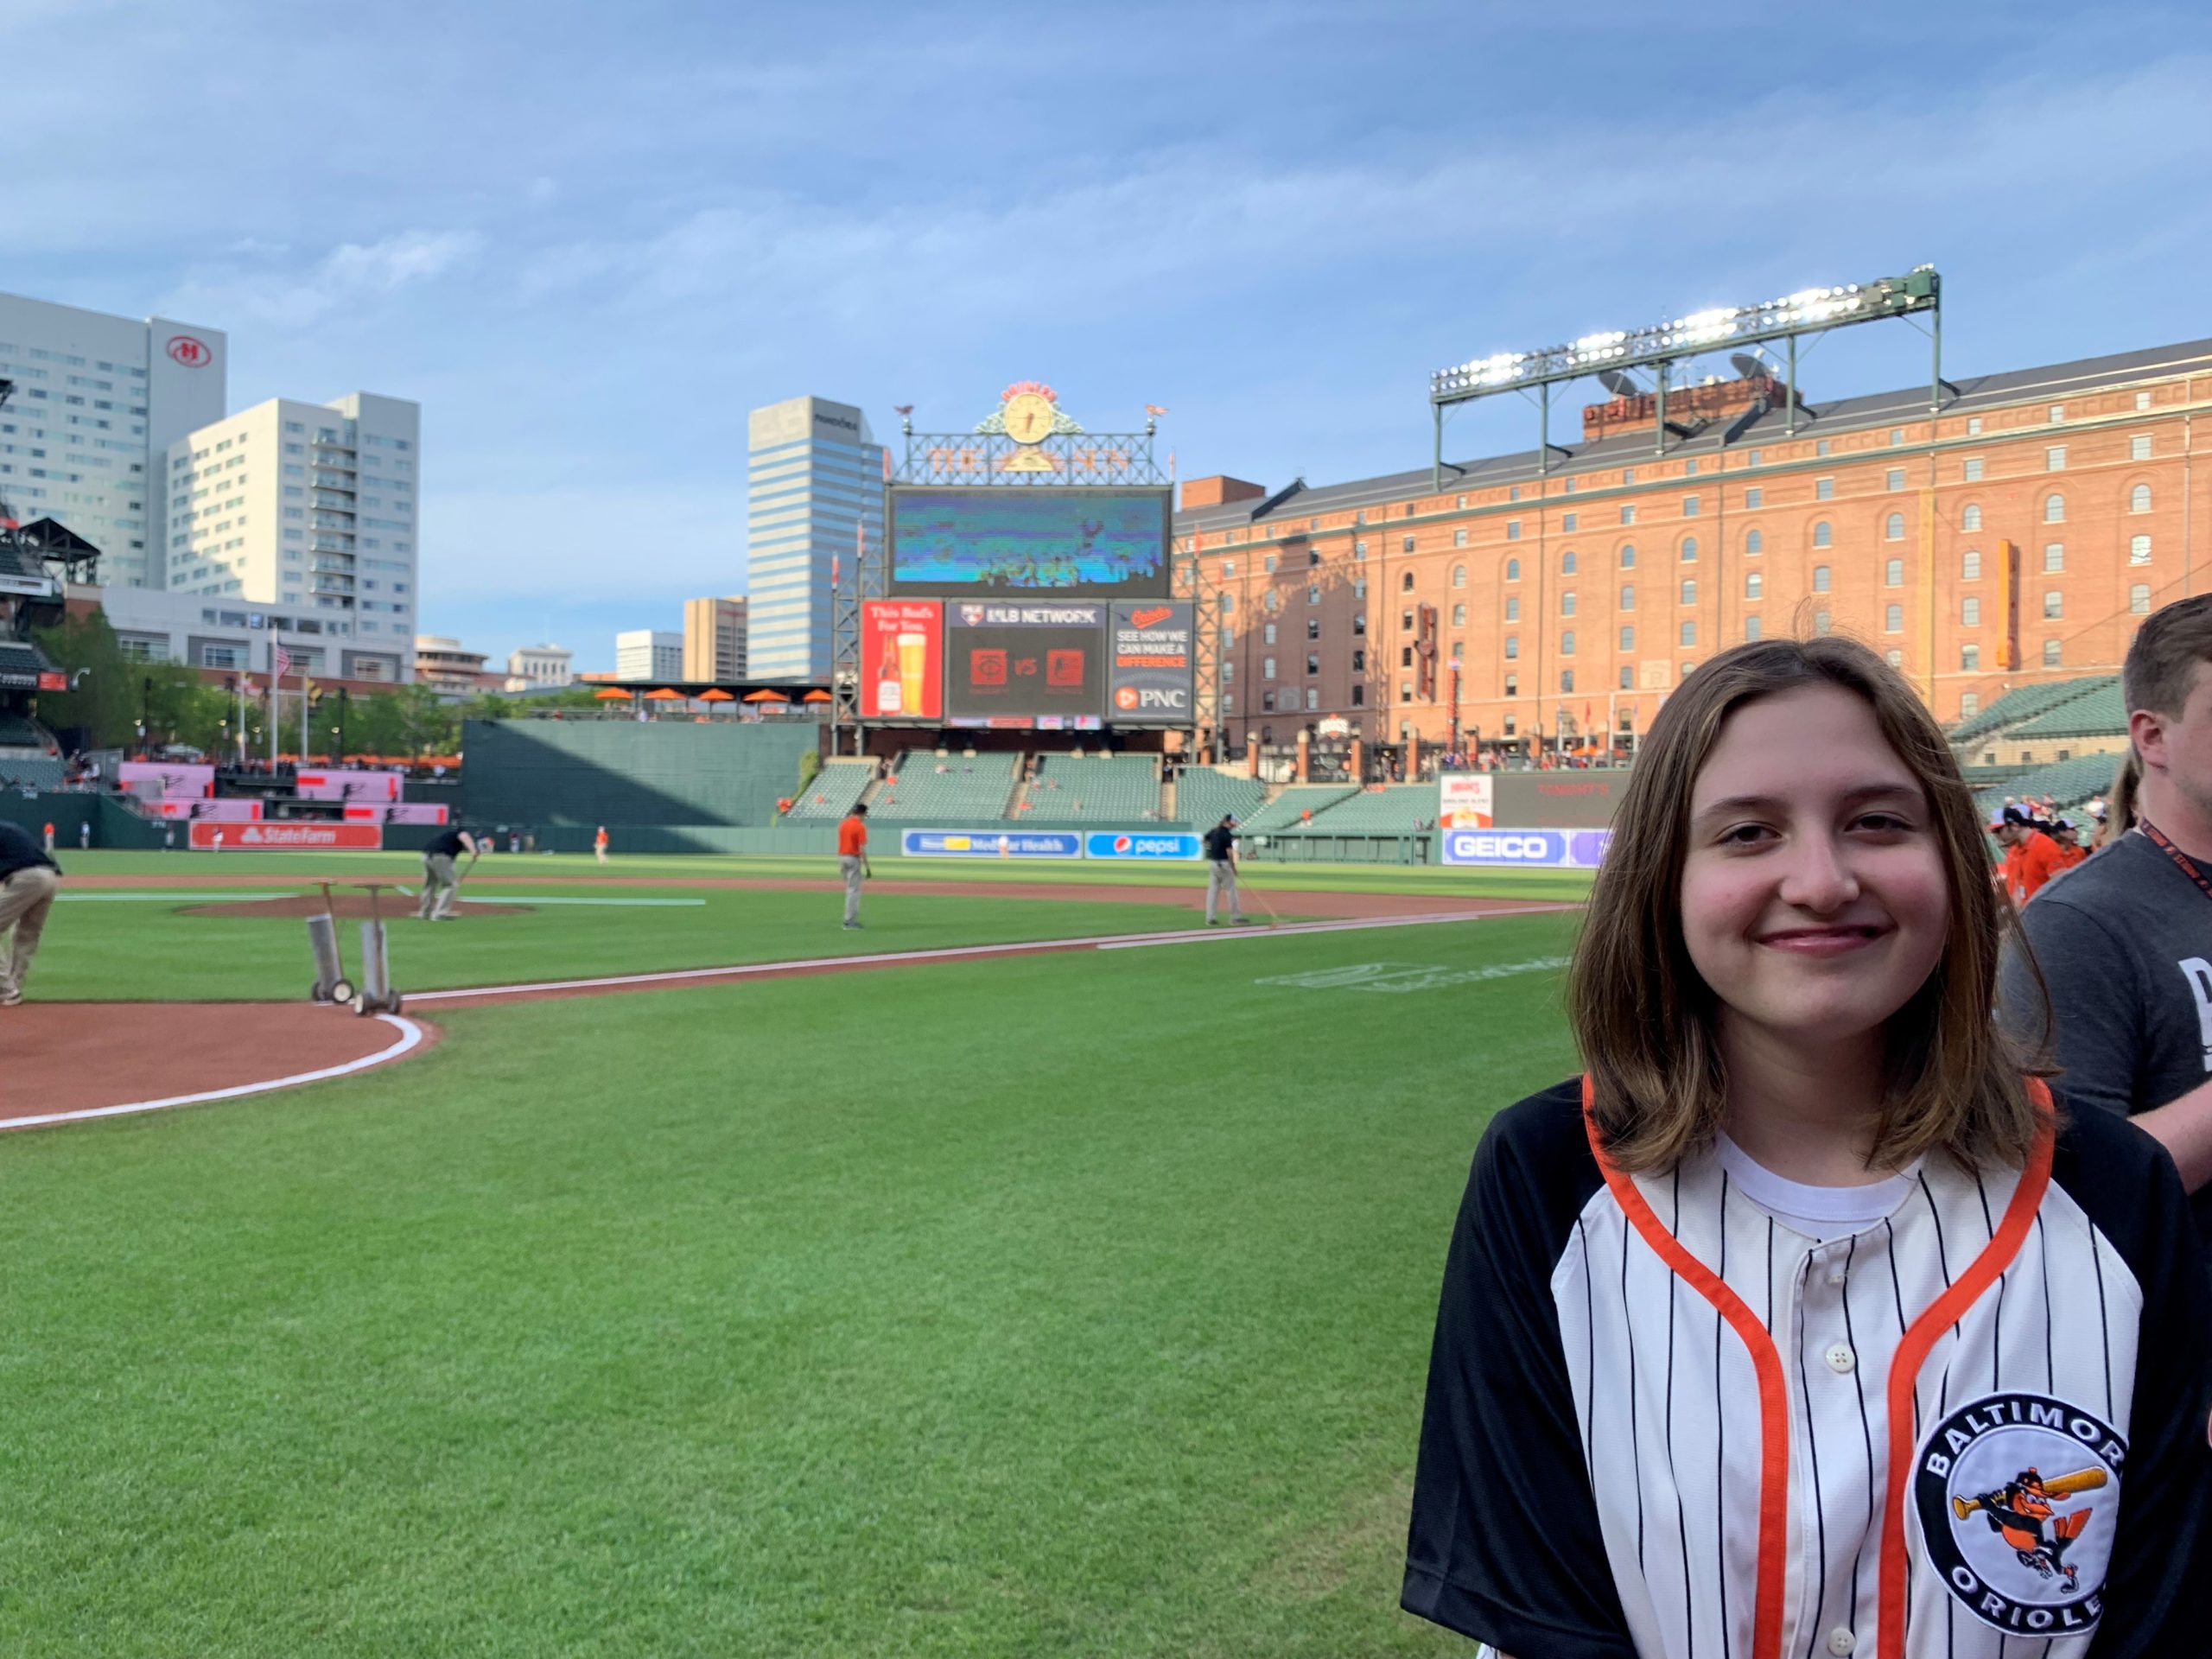 Michele, who is a cochlear implant recipient with progressive hearing loss, on the field